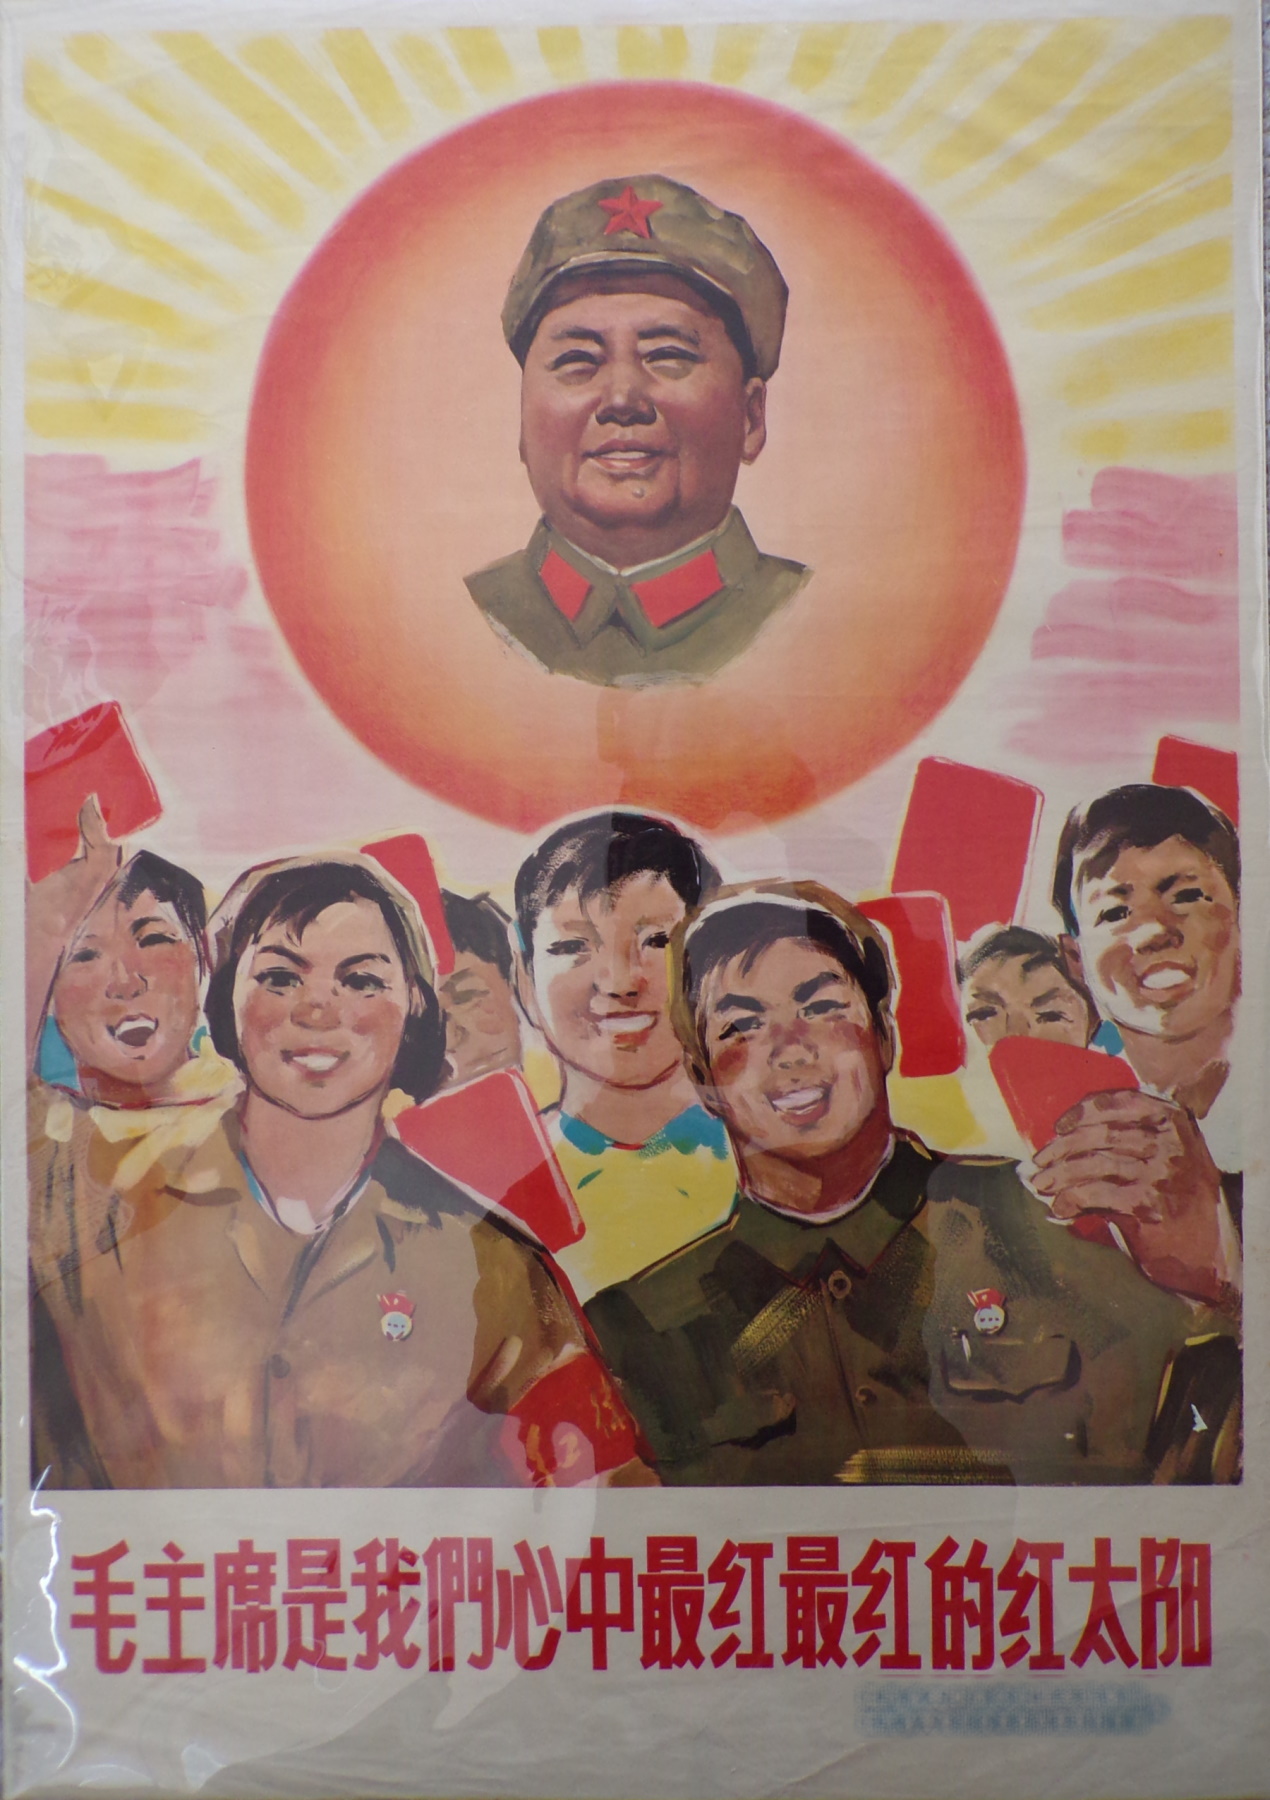 Chairman Mao is the Reddest of Red Suns in our Hearts 毛主席是我们心中最红最红的红太阳